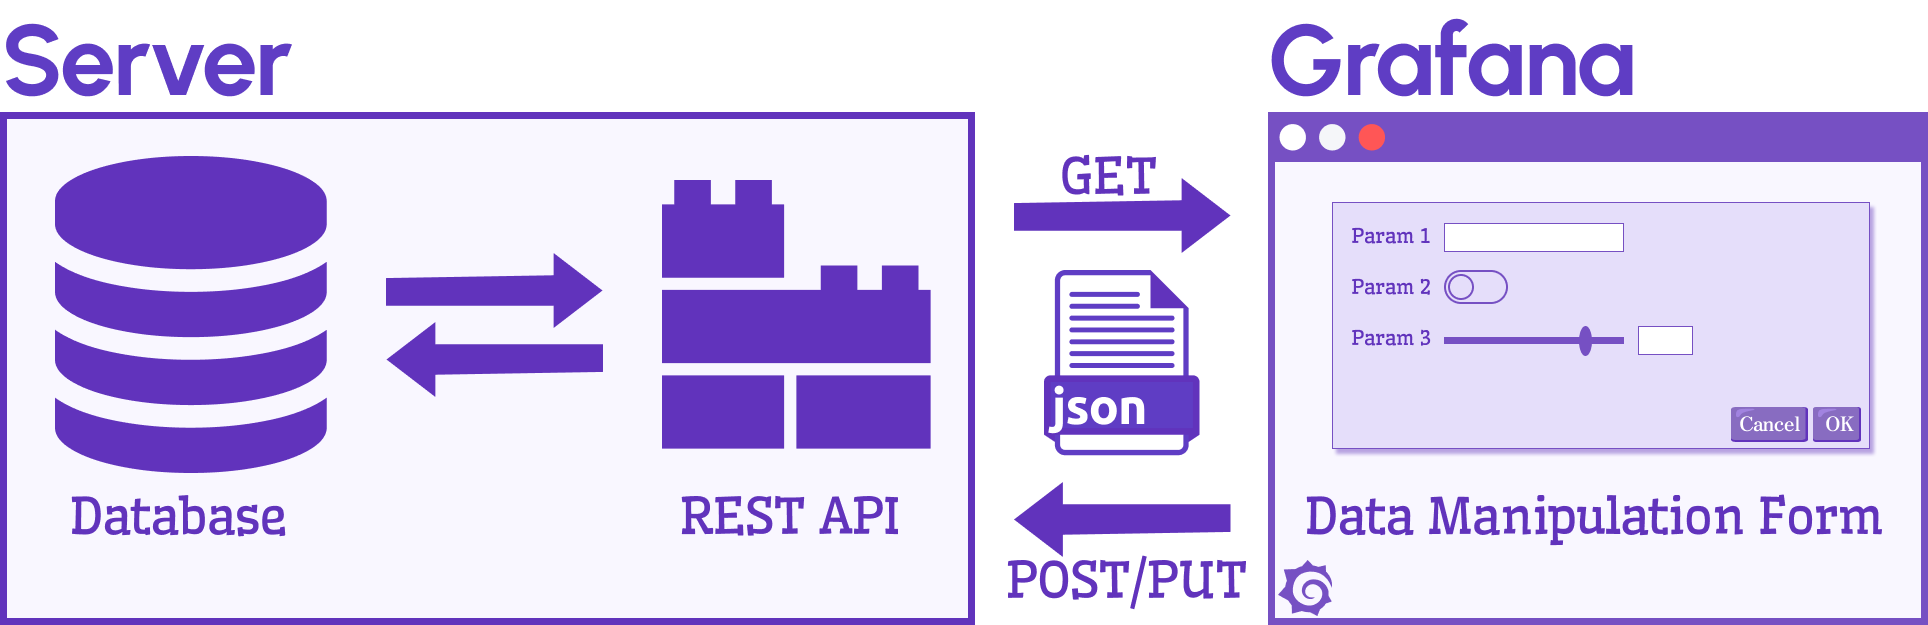 Data Manipulation Panel uses GET or POST/PUT request to interact with API server.